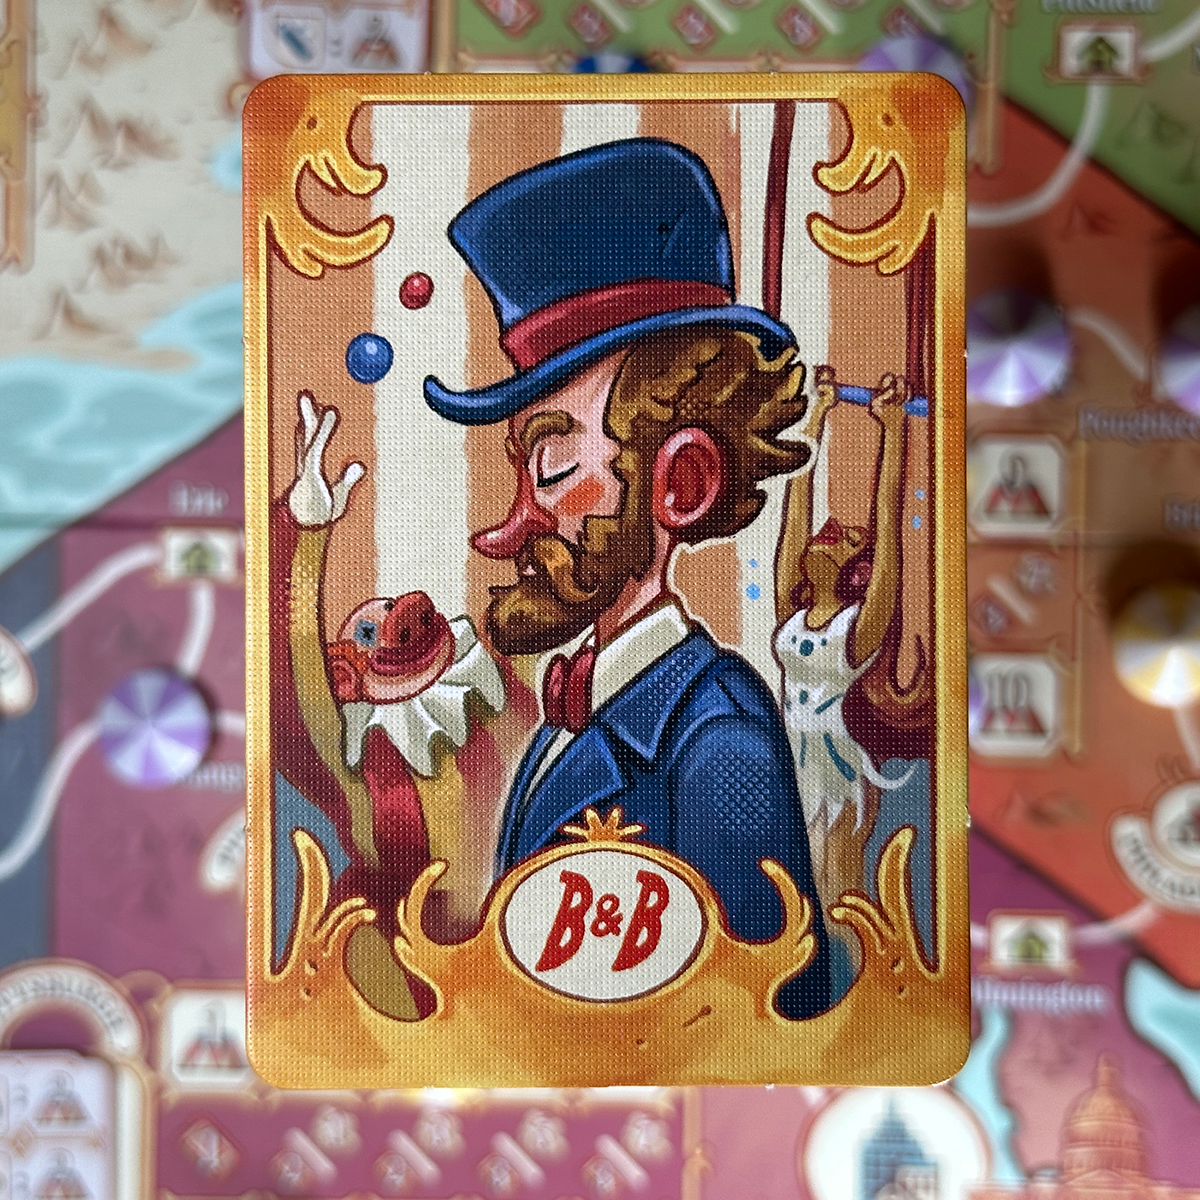 3 Ring Circus board game review Barnum player marker